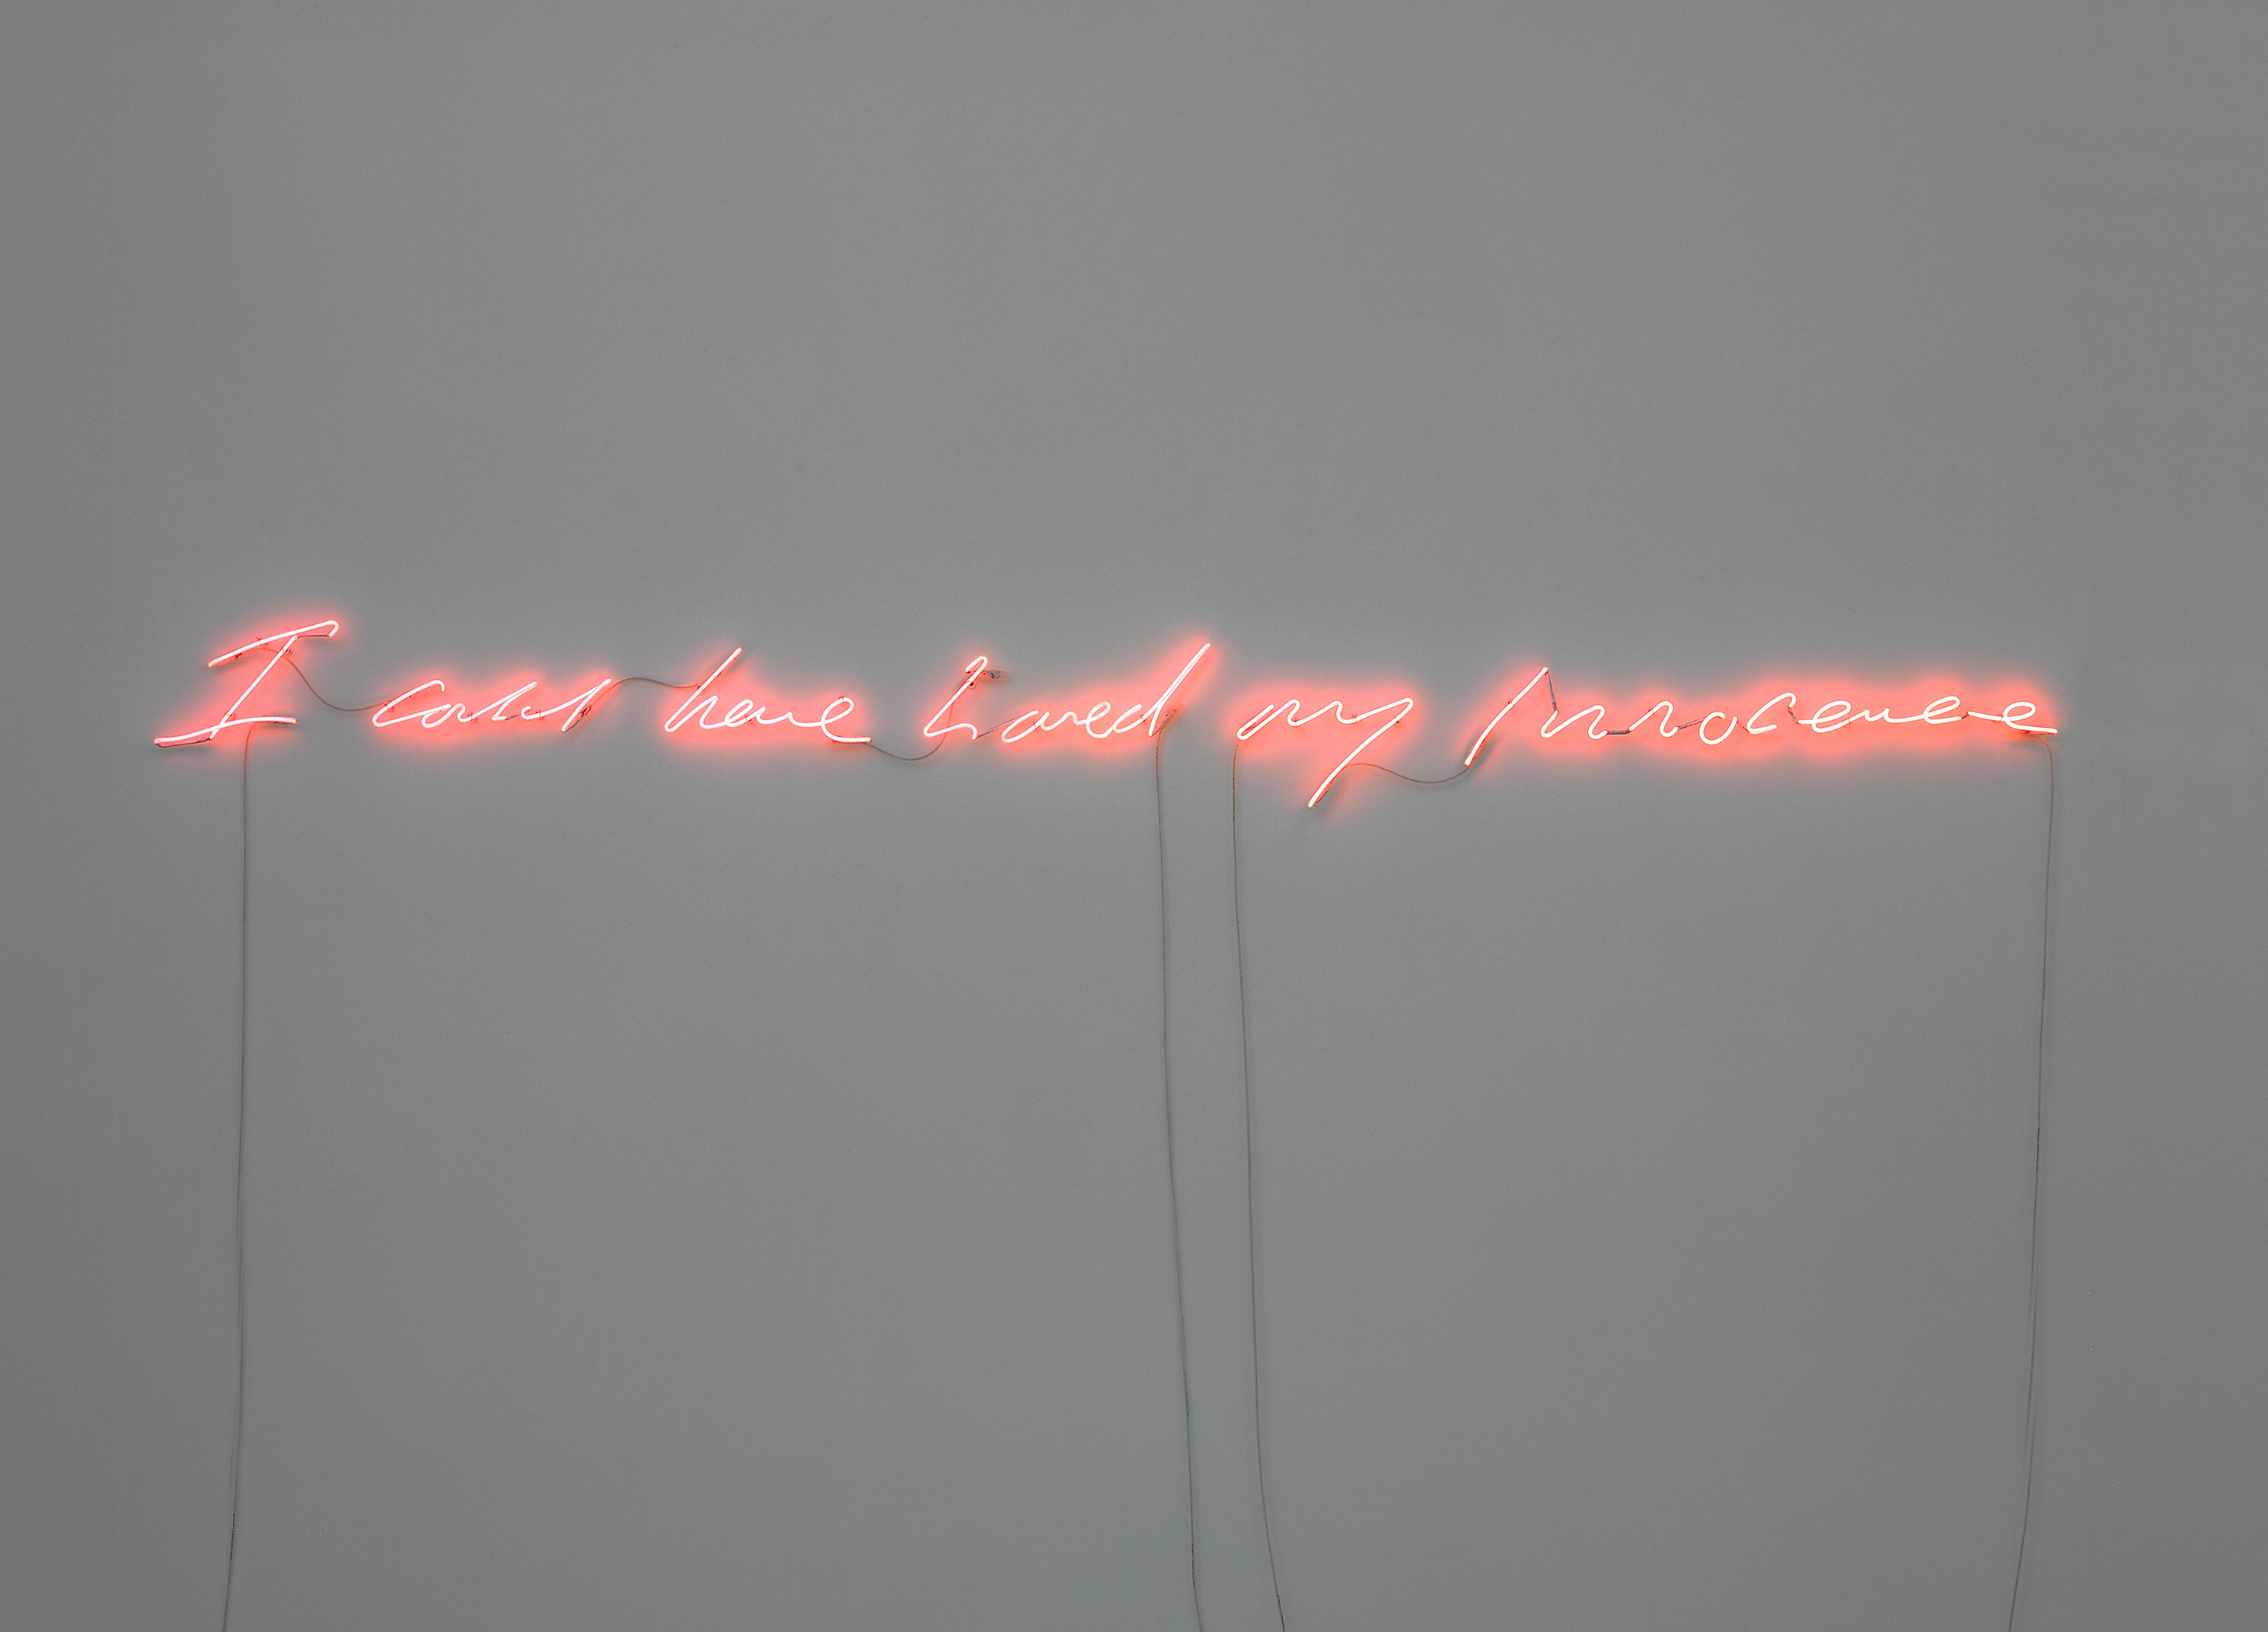 We must cultivate our garden_Lee Cavaliere_margate now festival 2019_image by Tracey Emin_I could have Loved my Innocence